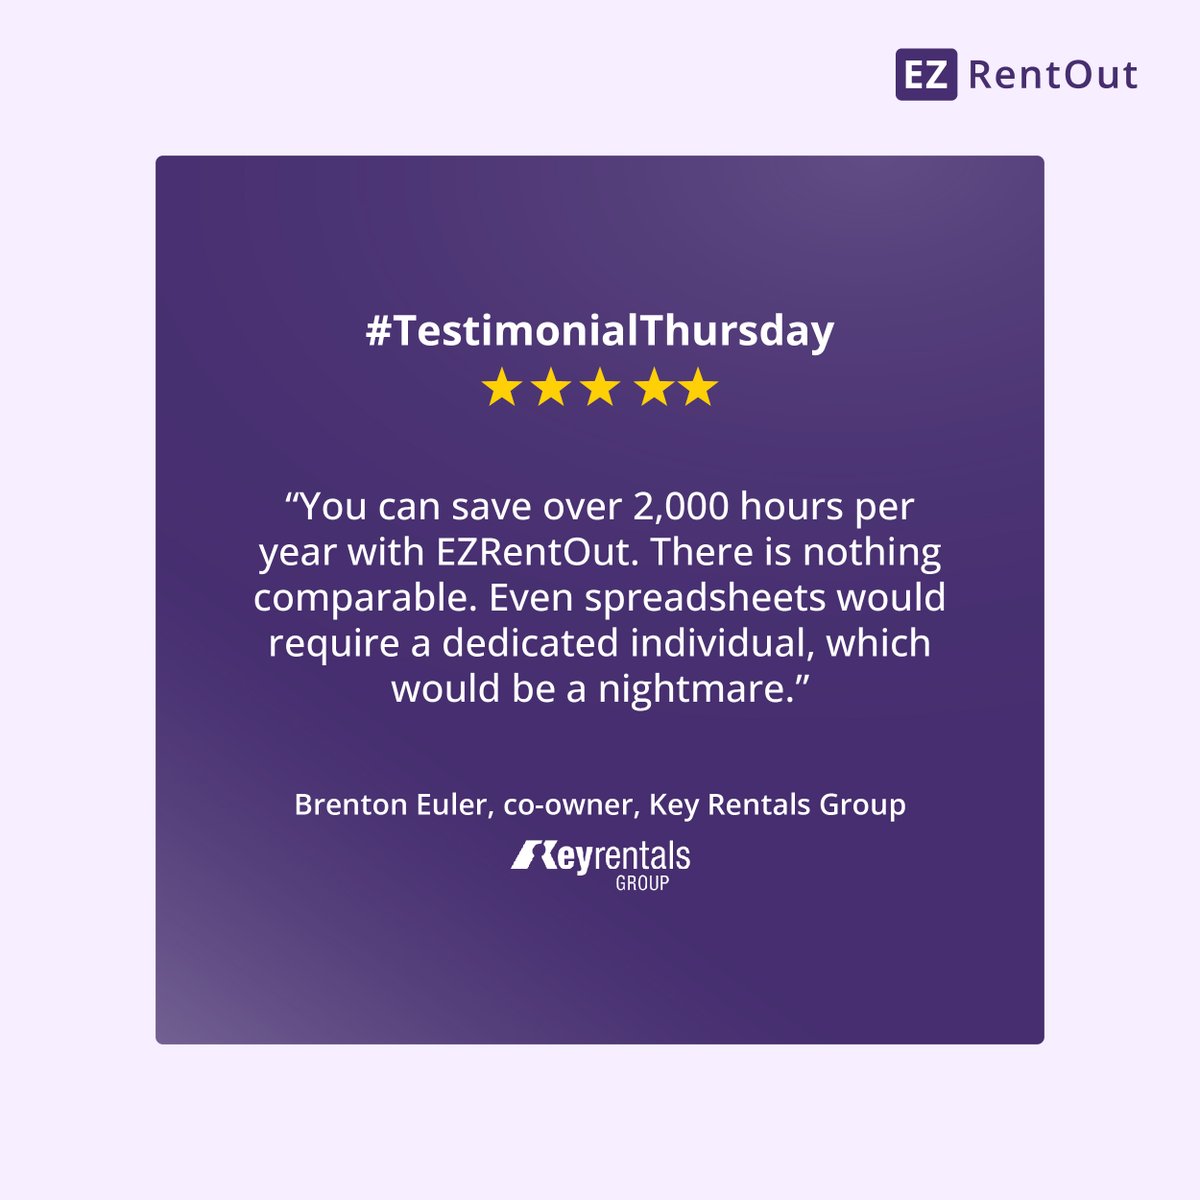 #TestimonialThursday ⭐⭐⭐⭐⭐

We're thrilled to hear that investing in EZRentOut was a rewarding choice. Your satisfaction is our ultimate reward.

#Testimonial #CustomerSuccess #EquipmentRental